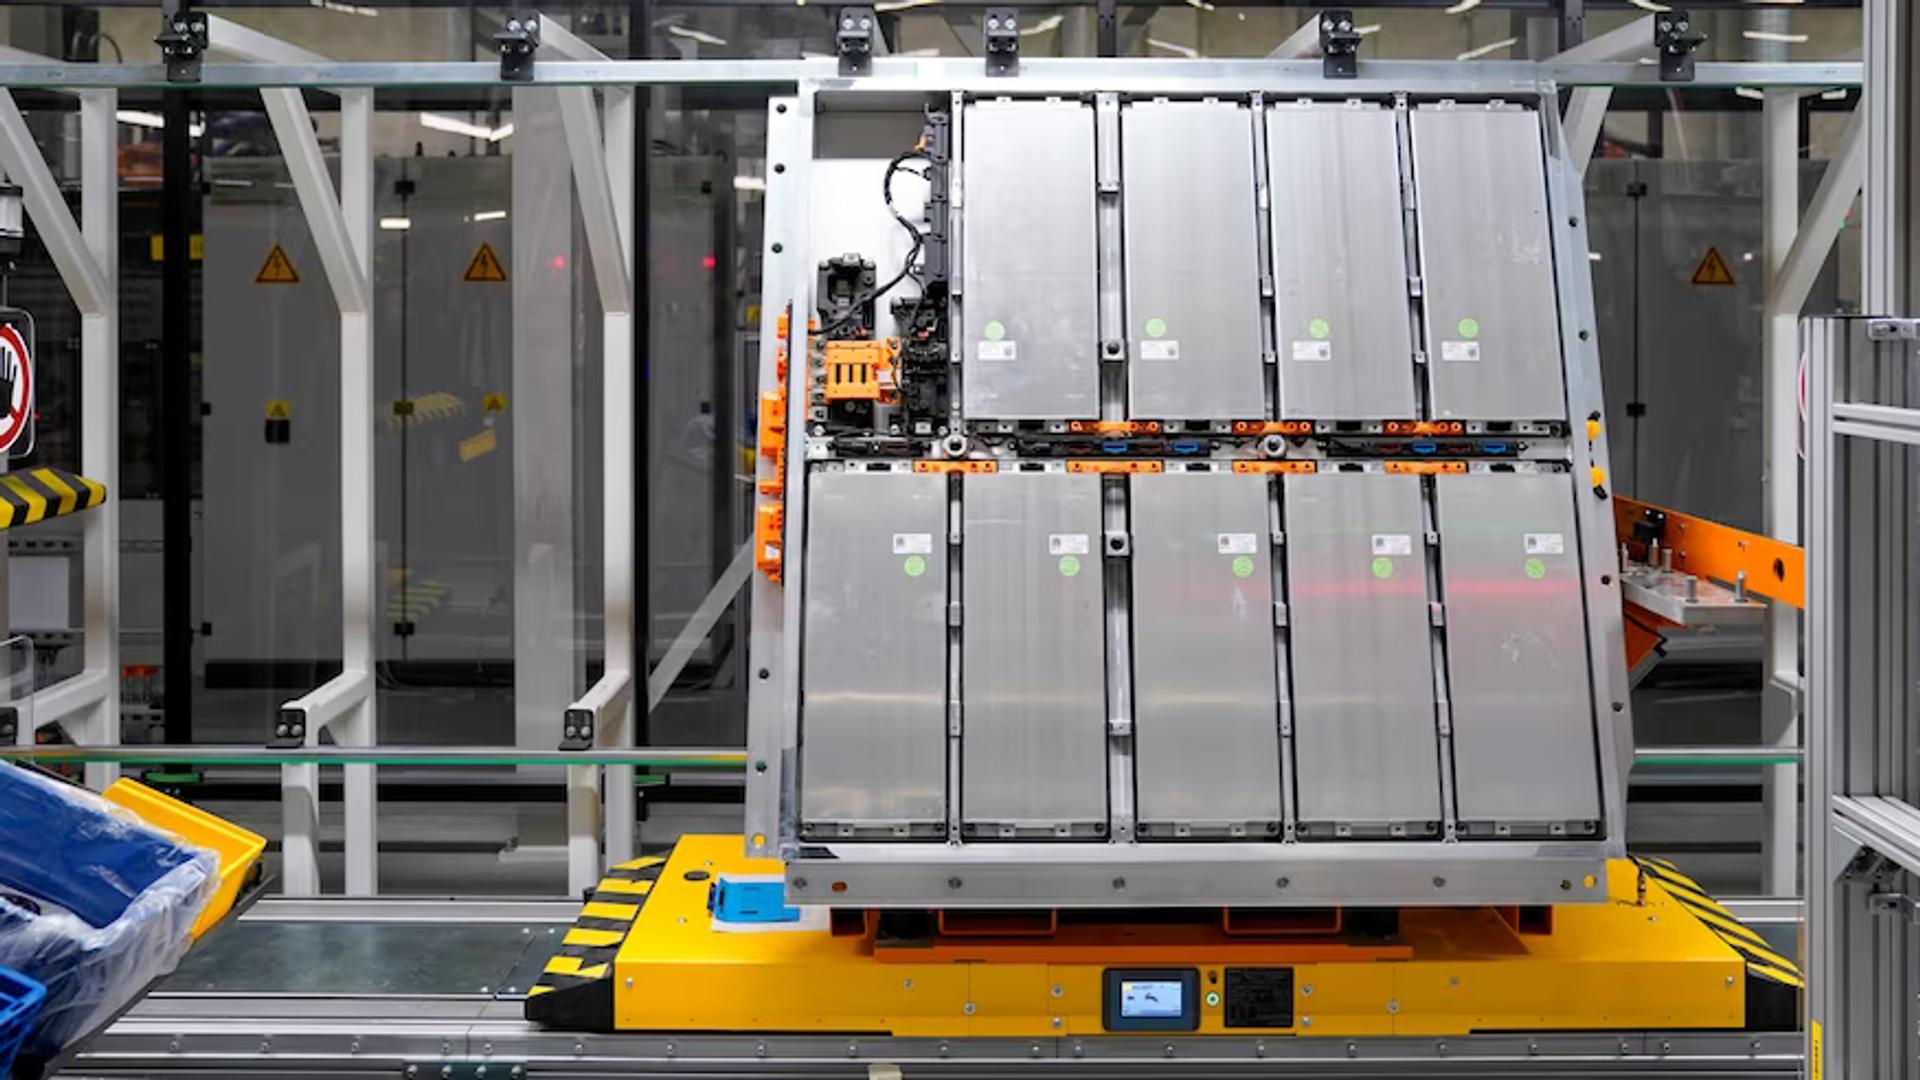 Volkswagen-VW-Battery-24M-Quantumscape-Battery-Engineering-Lab-BEL-Battery-Life-Cycle-Recycling-5.avif